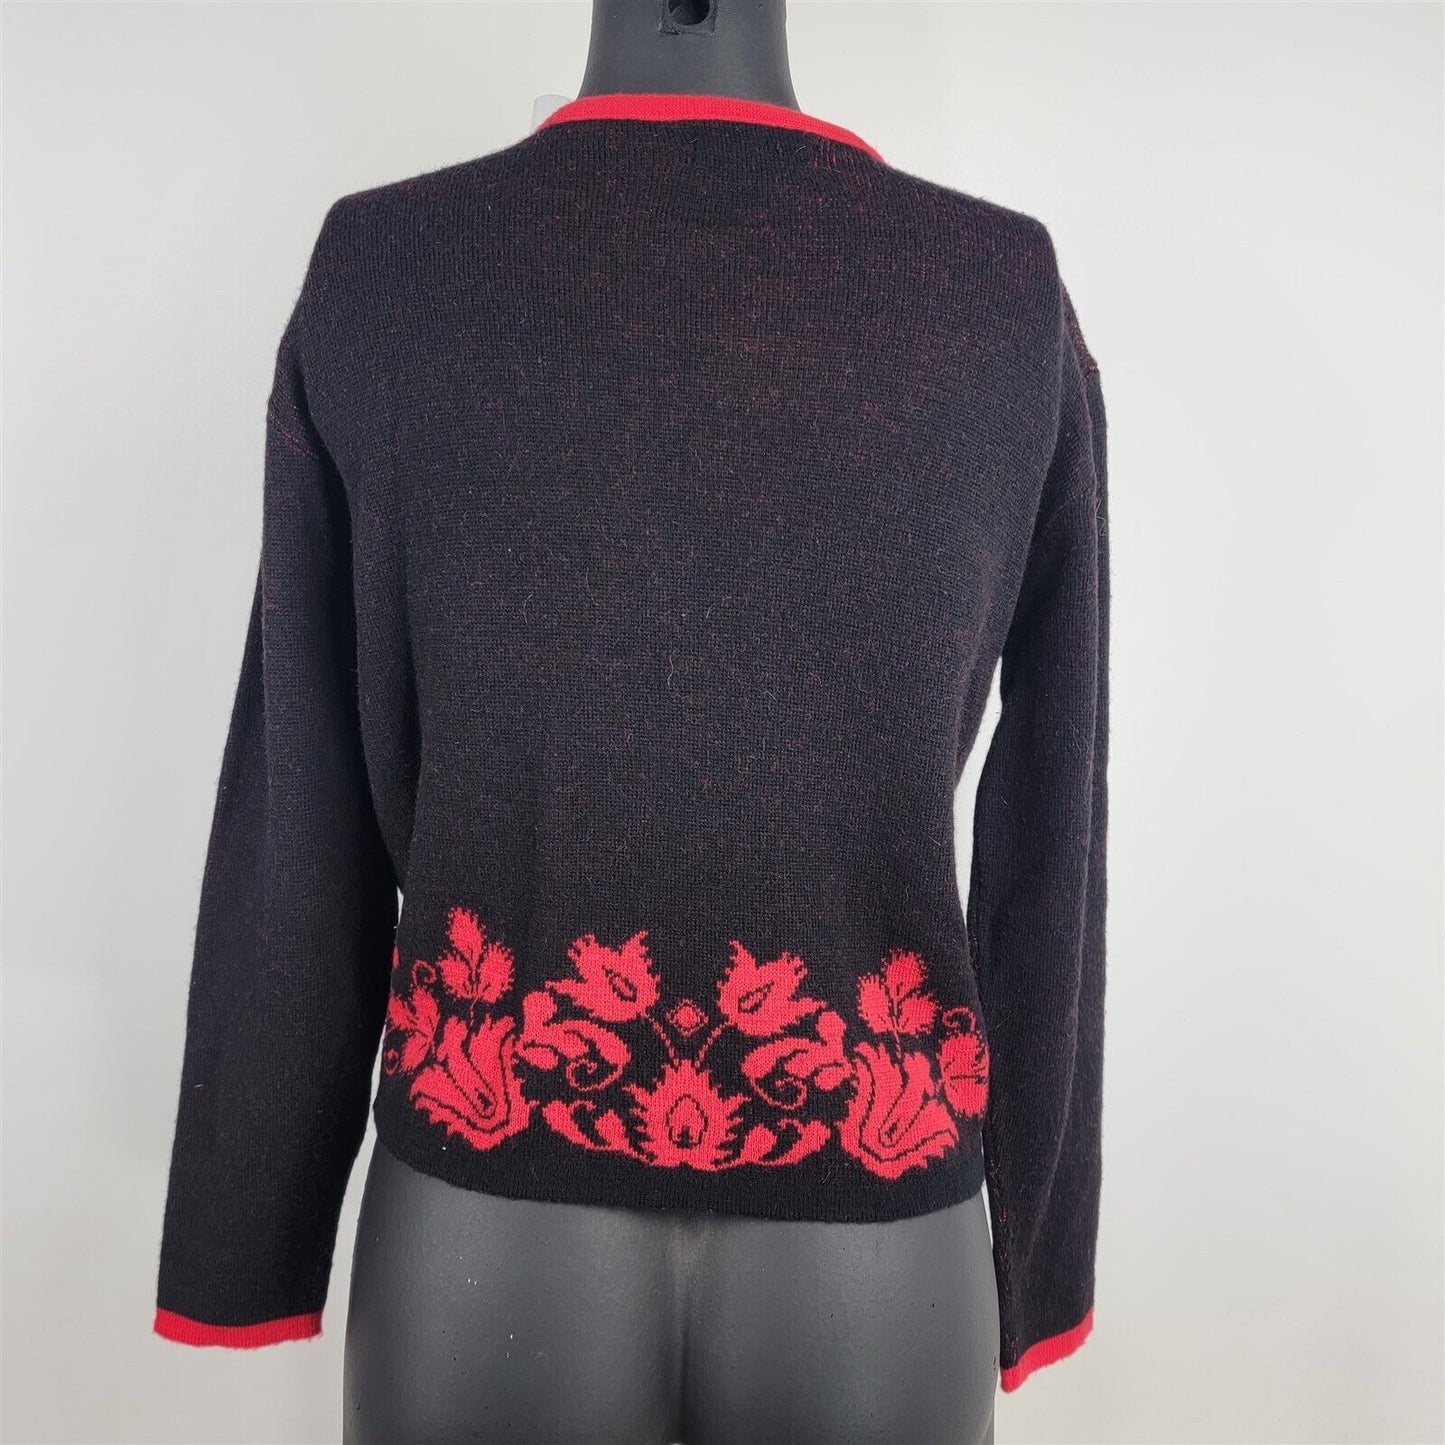 Vintage Koret of California Black & Red Cardigan Sweater Button Front Womens S